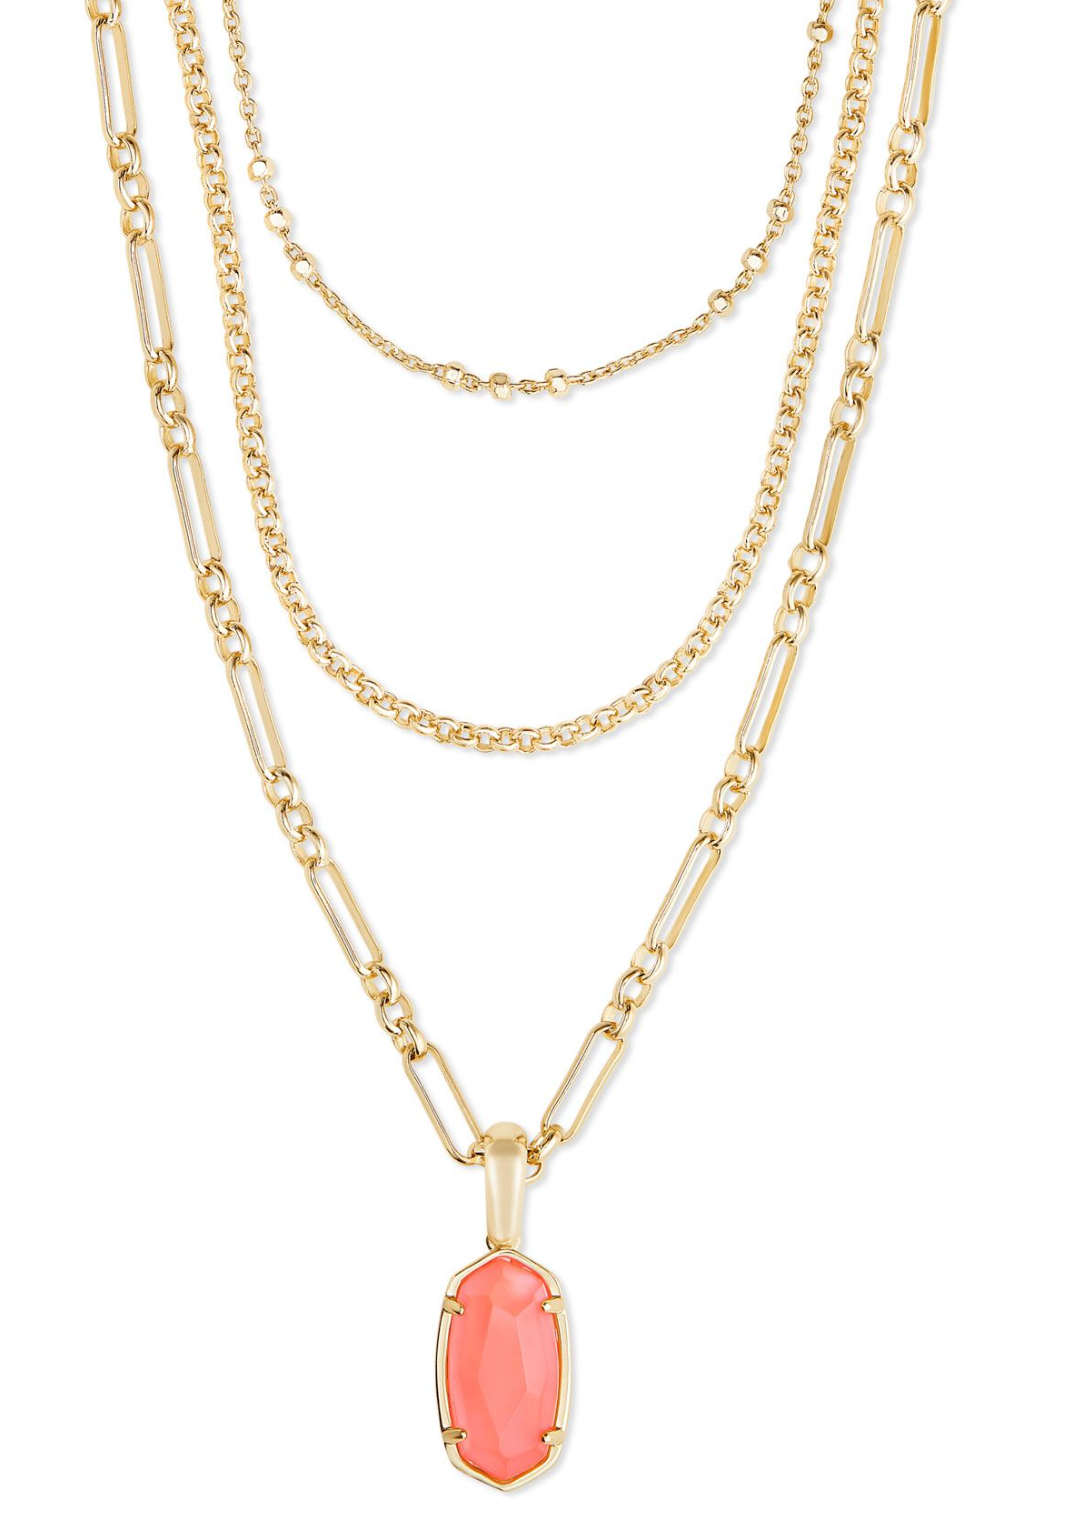 Kendra Scott Elisa Triple Strand Necklace in Gold Coral Illusion